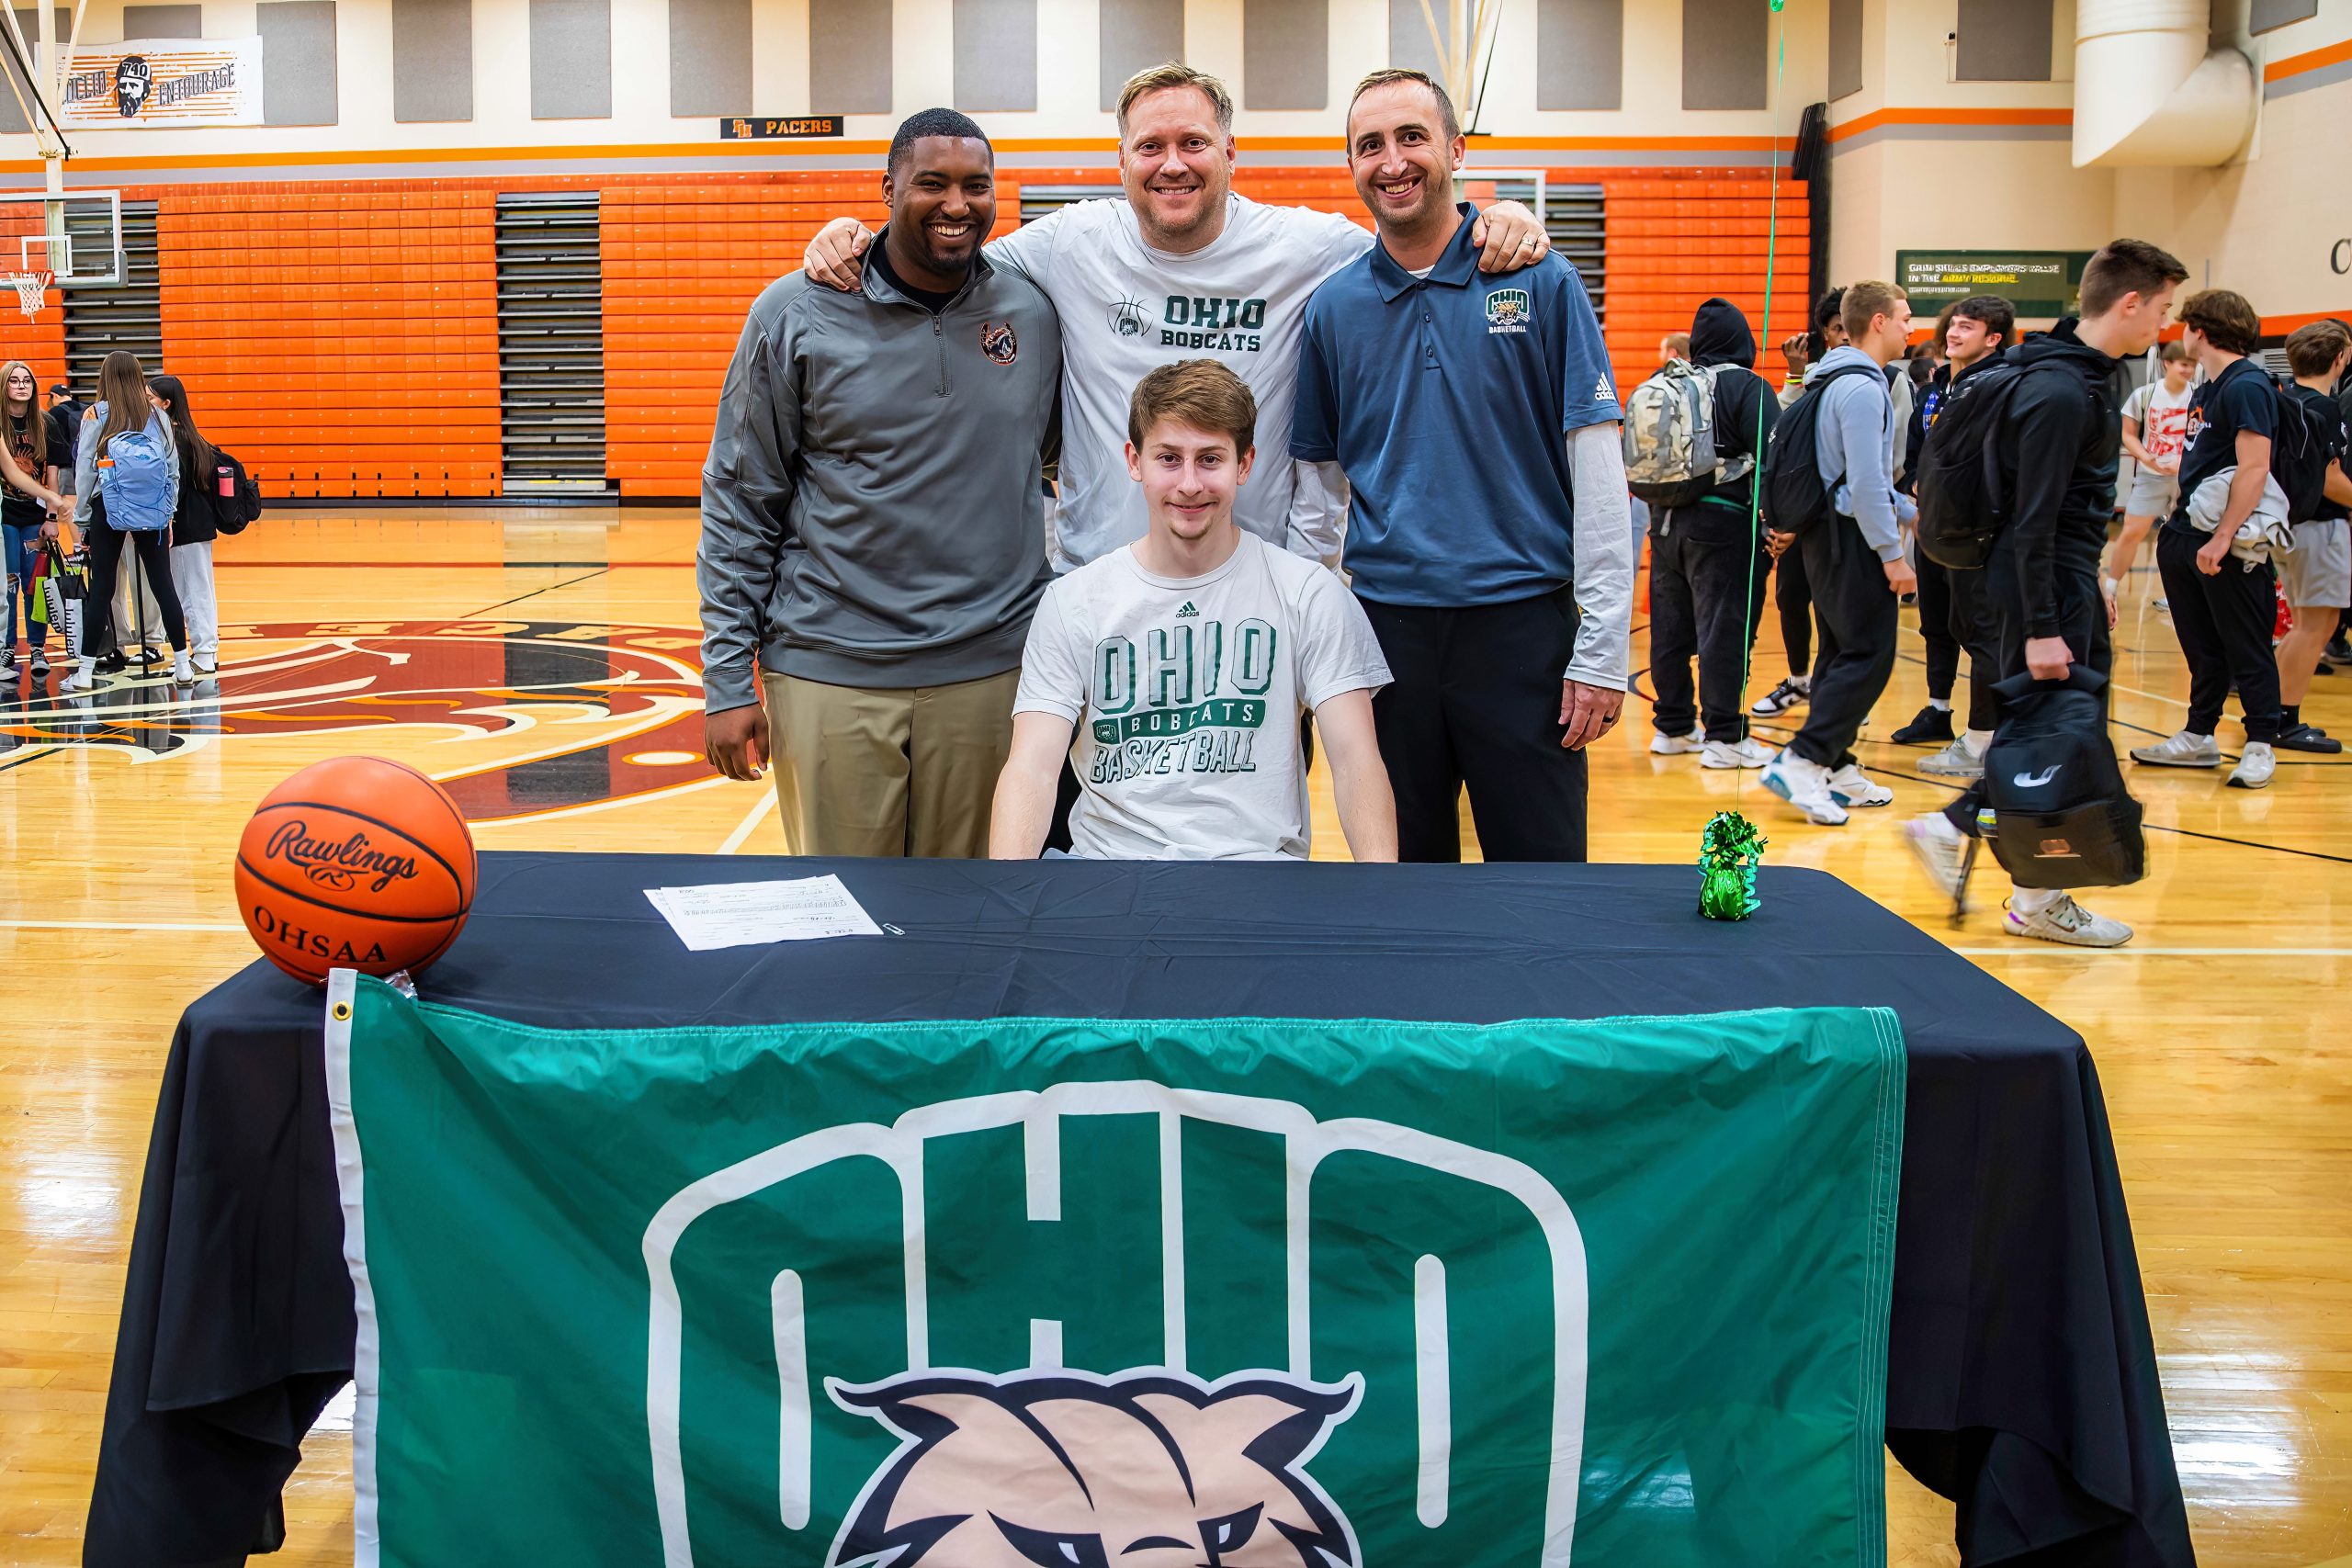 Coaches Keith Butts, Rob Price and Adam Vincenzo stand behind Jesse Burris after he signed to play basketball at Ohio University.